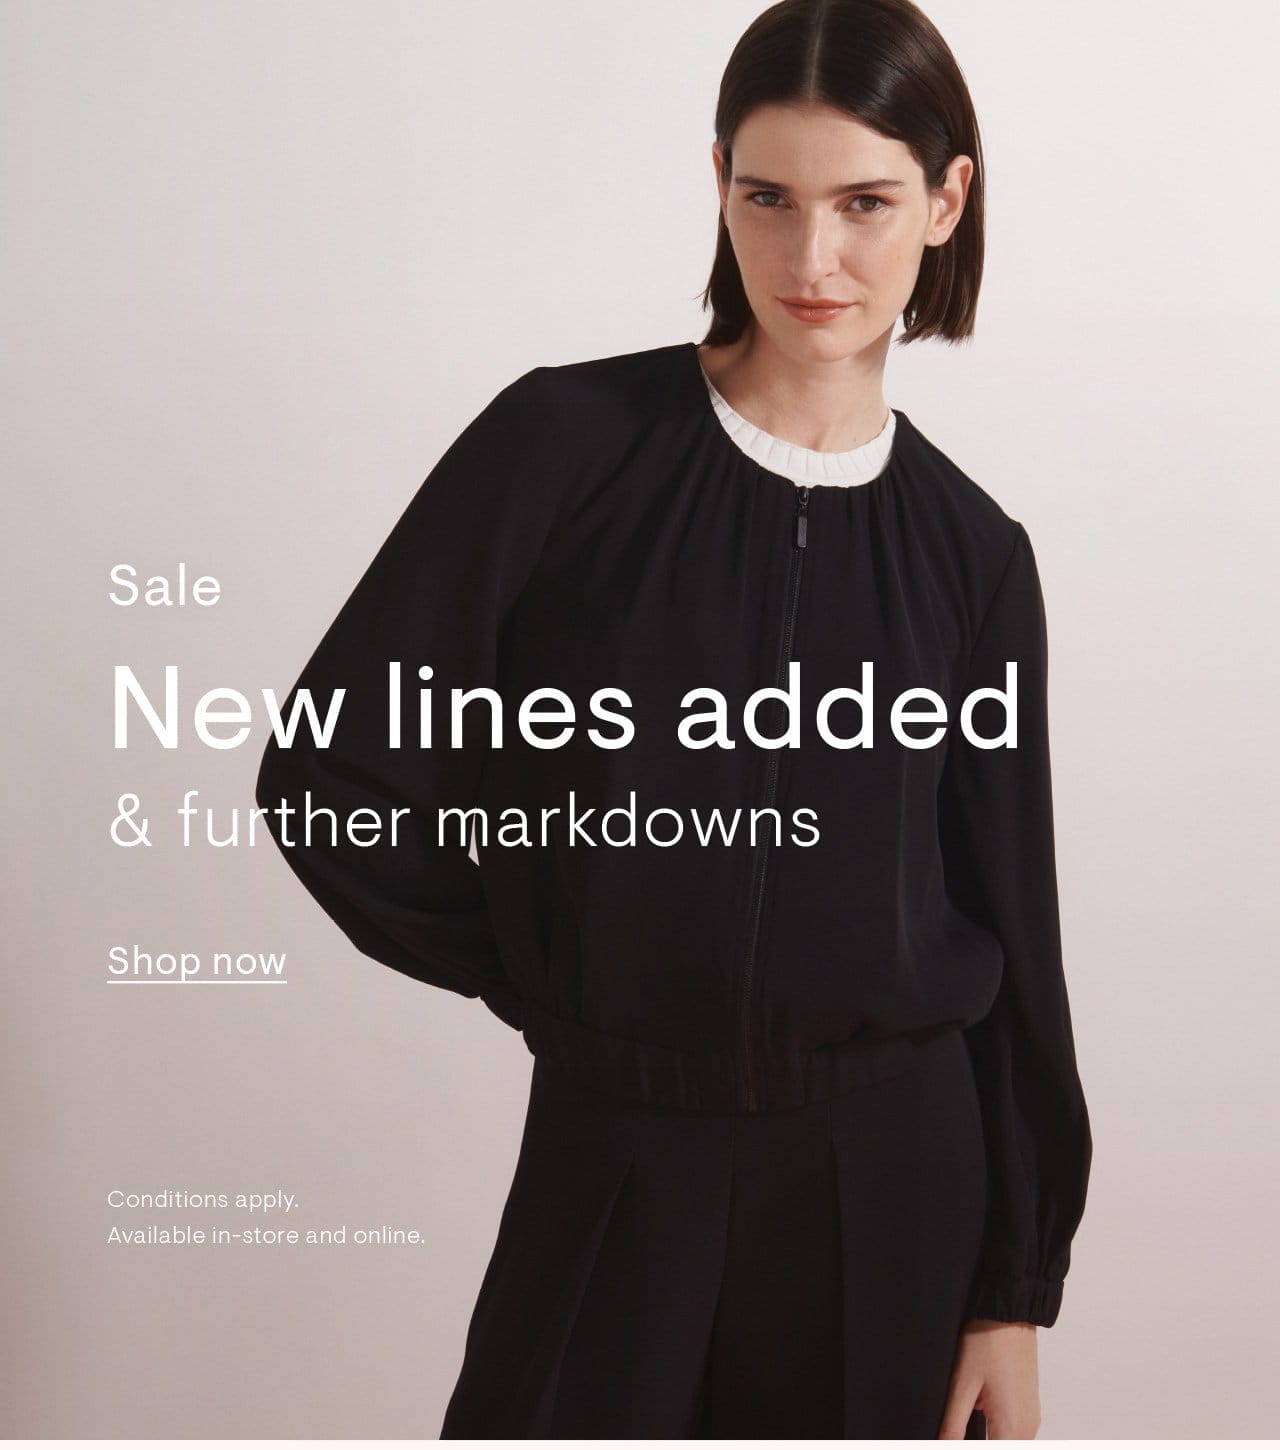 Sale. New lines added & further markdowns. Shop now